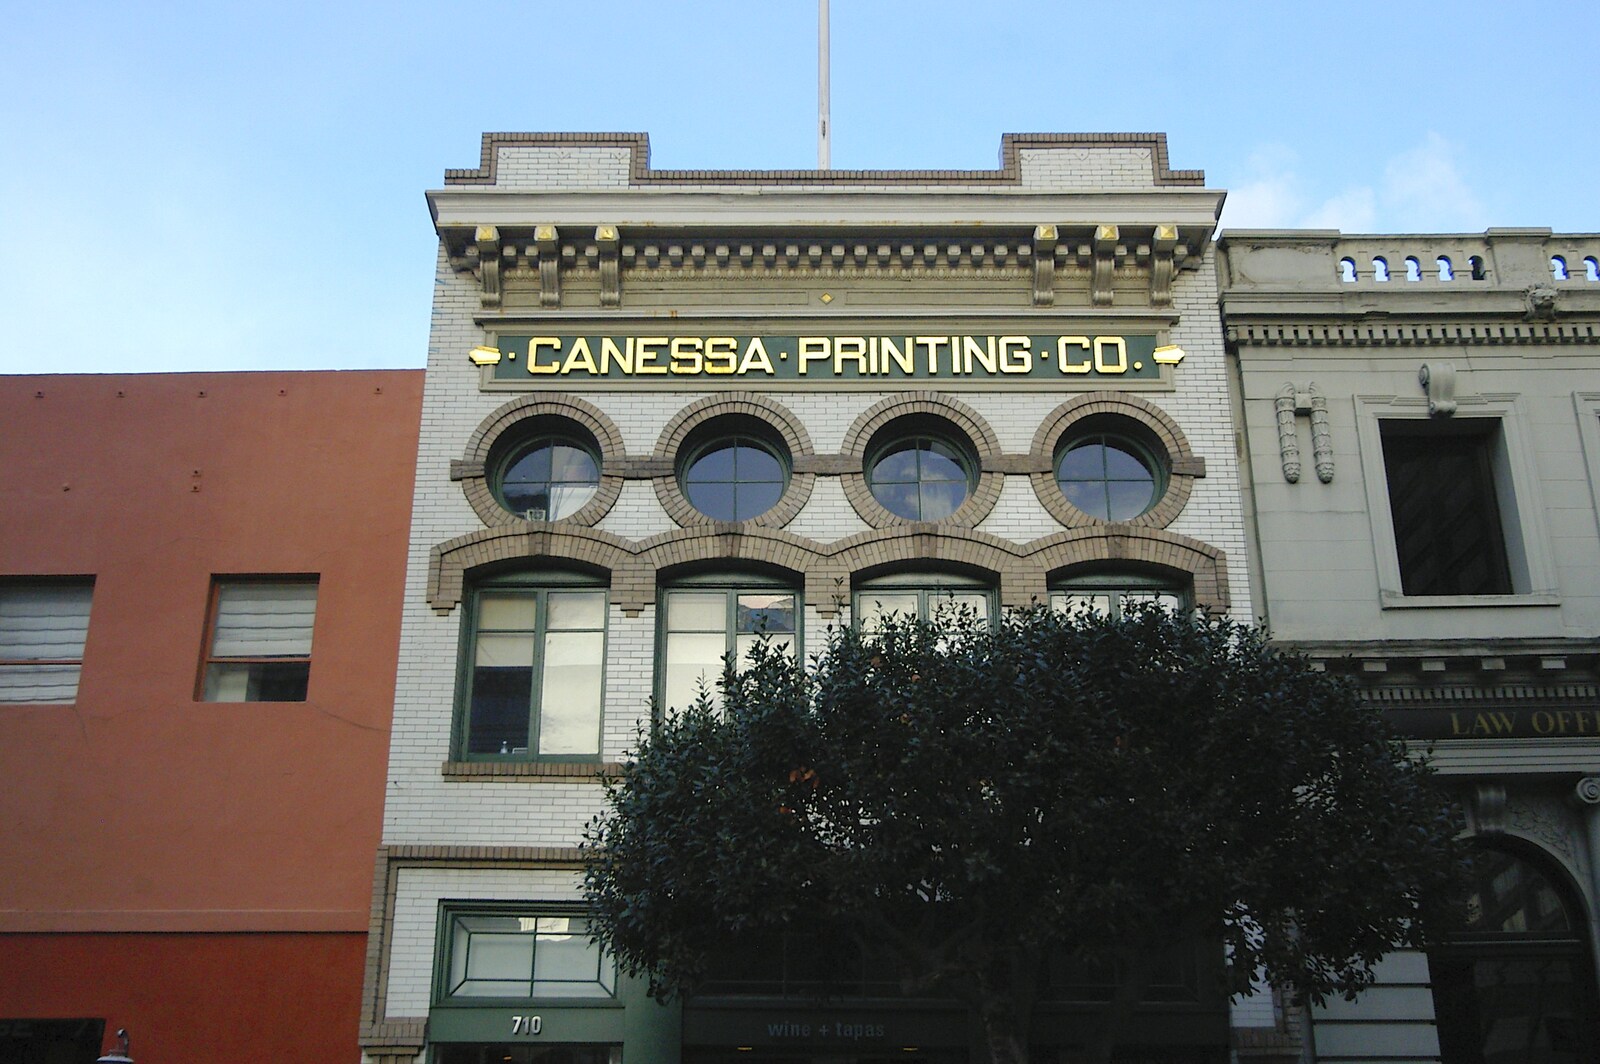 The Canessa Printing Co. from The Golden Gate Bridge, San Francisco, California, US - 11th March 2006